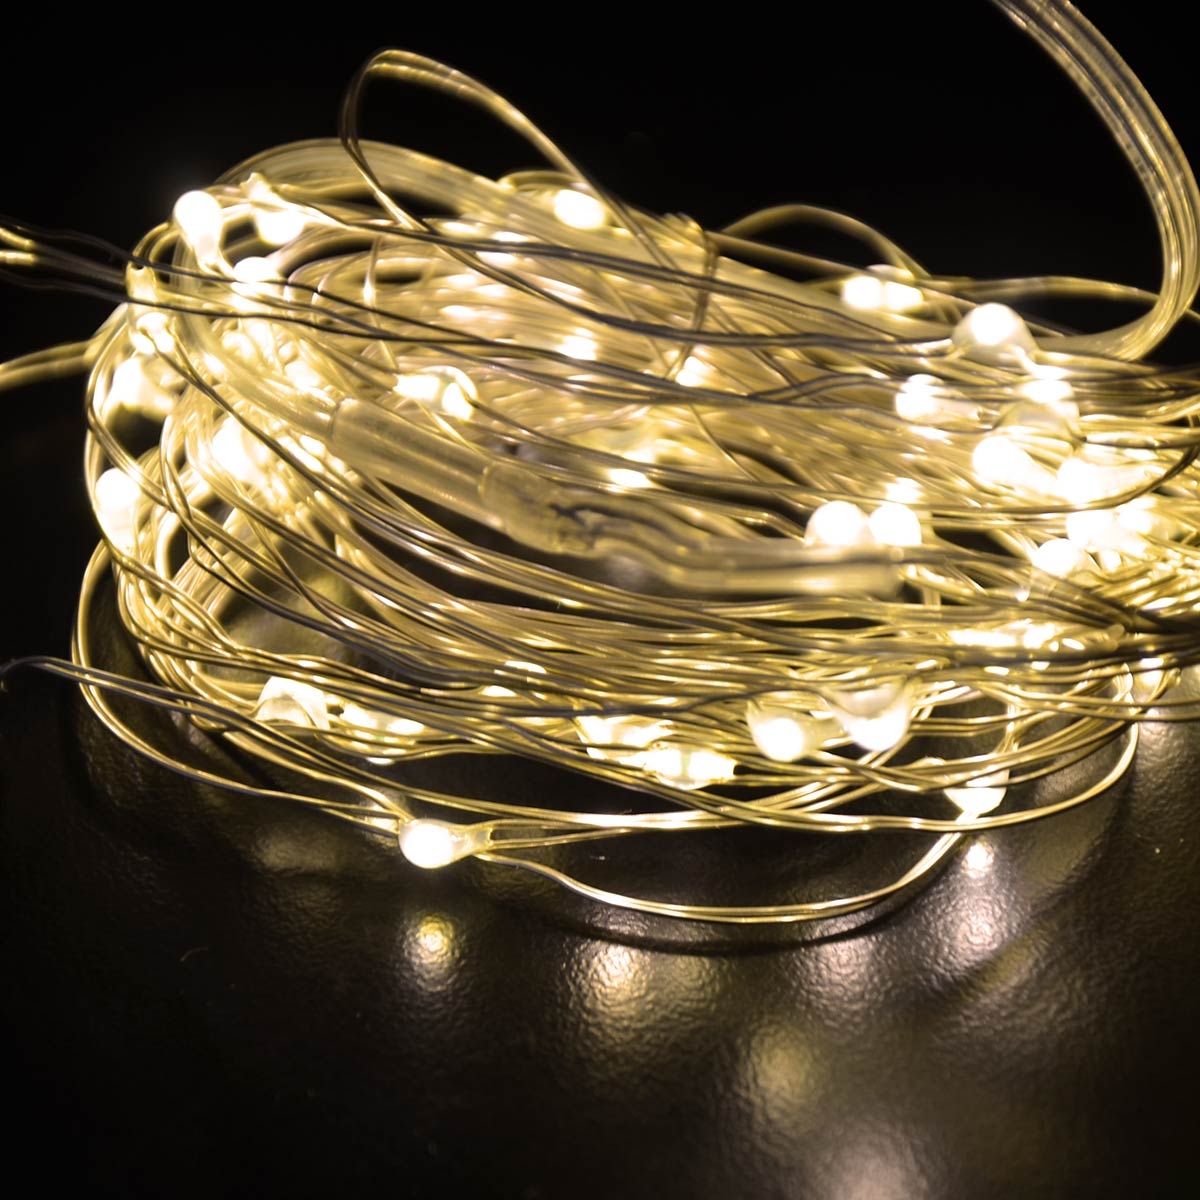 String Decoration Light Warm White 50LED (5M) Battery Operated for Christmas, Wedding and Parties